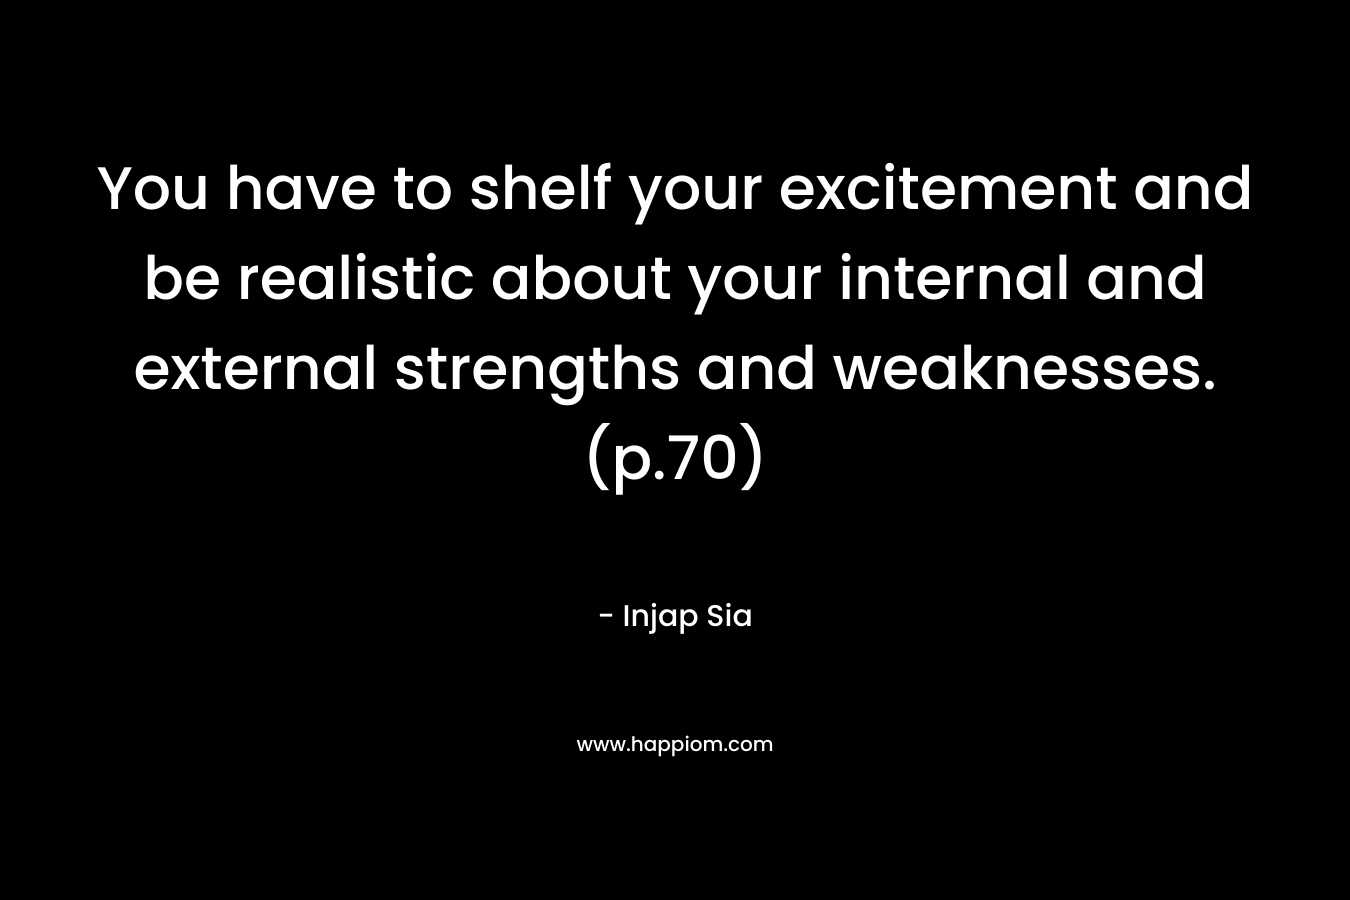 You have to shelf your excitement and be realistic about your internal and external strengths and weaknesses. (p.70)